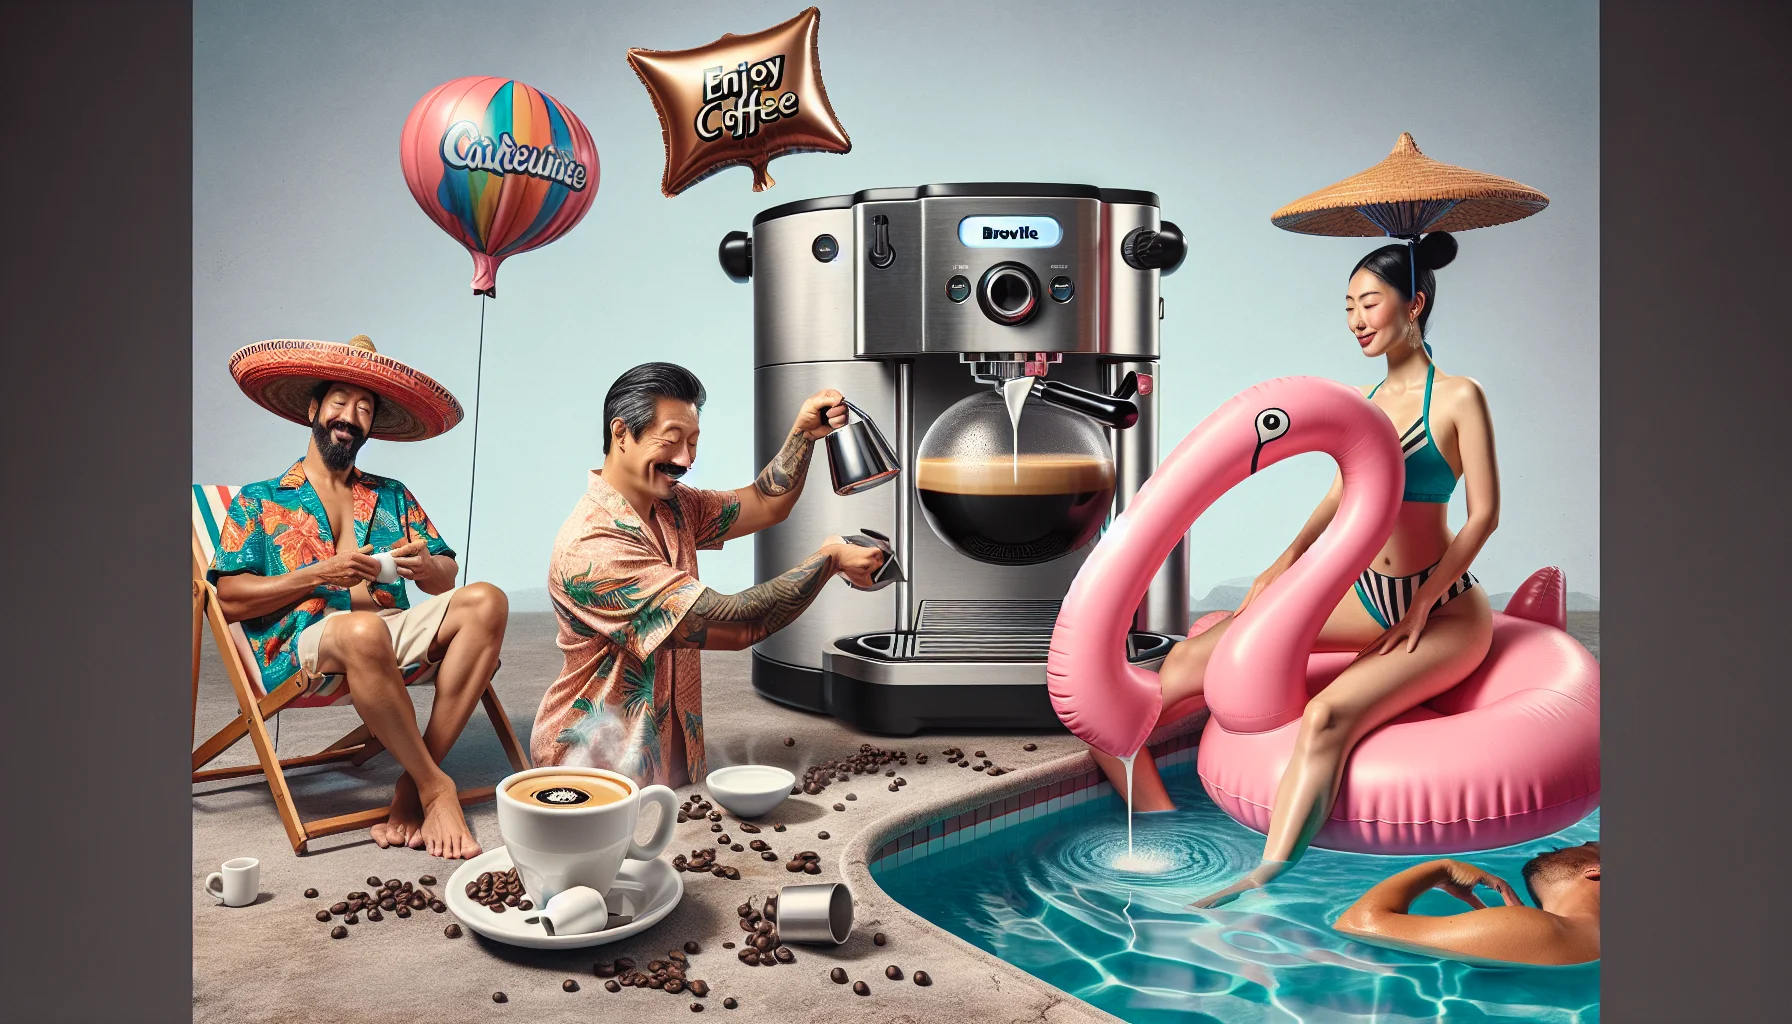 Imagine a scene that invites humor while advertising a high-quality espresso maker. The espresso maker has an attractive stainless-steel design similar to the Breville Barista Express. It sits in an unusual scenario, perhaps balanced precariously on an inflatable flamingo in a swimming pool. Nearby, a man of Eastern Asian descent, wearing a fancy sombrero and Hawaiian shirt, pours milk into a coffee cup with a look of concentration and joy. An amused woman of Middle Eastern descent lounges poolside, her smile welcoming as she holds out her cup in anticipation, and alluring balloons with 'Enjoy Coffee' float above. The whole scene embodies the concept of taking pleasure in the simple act of brewing coffee.